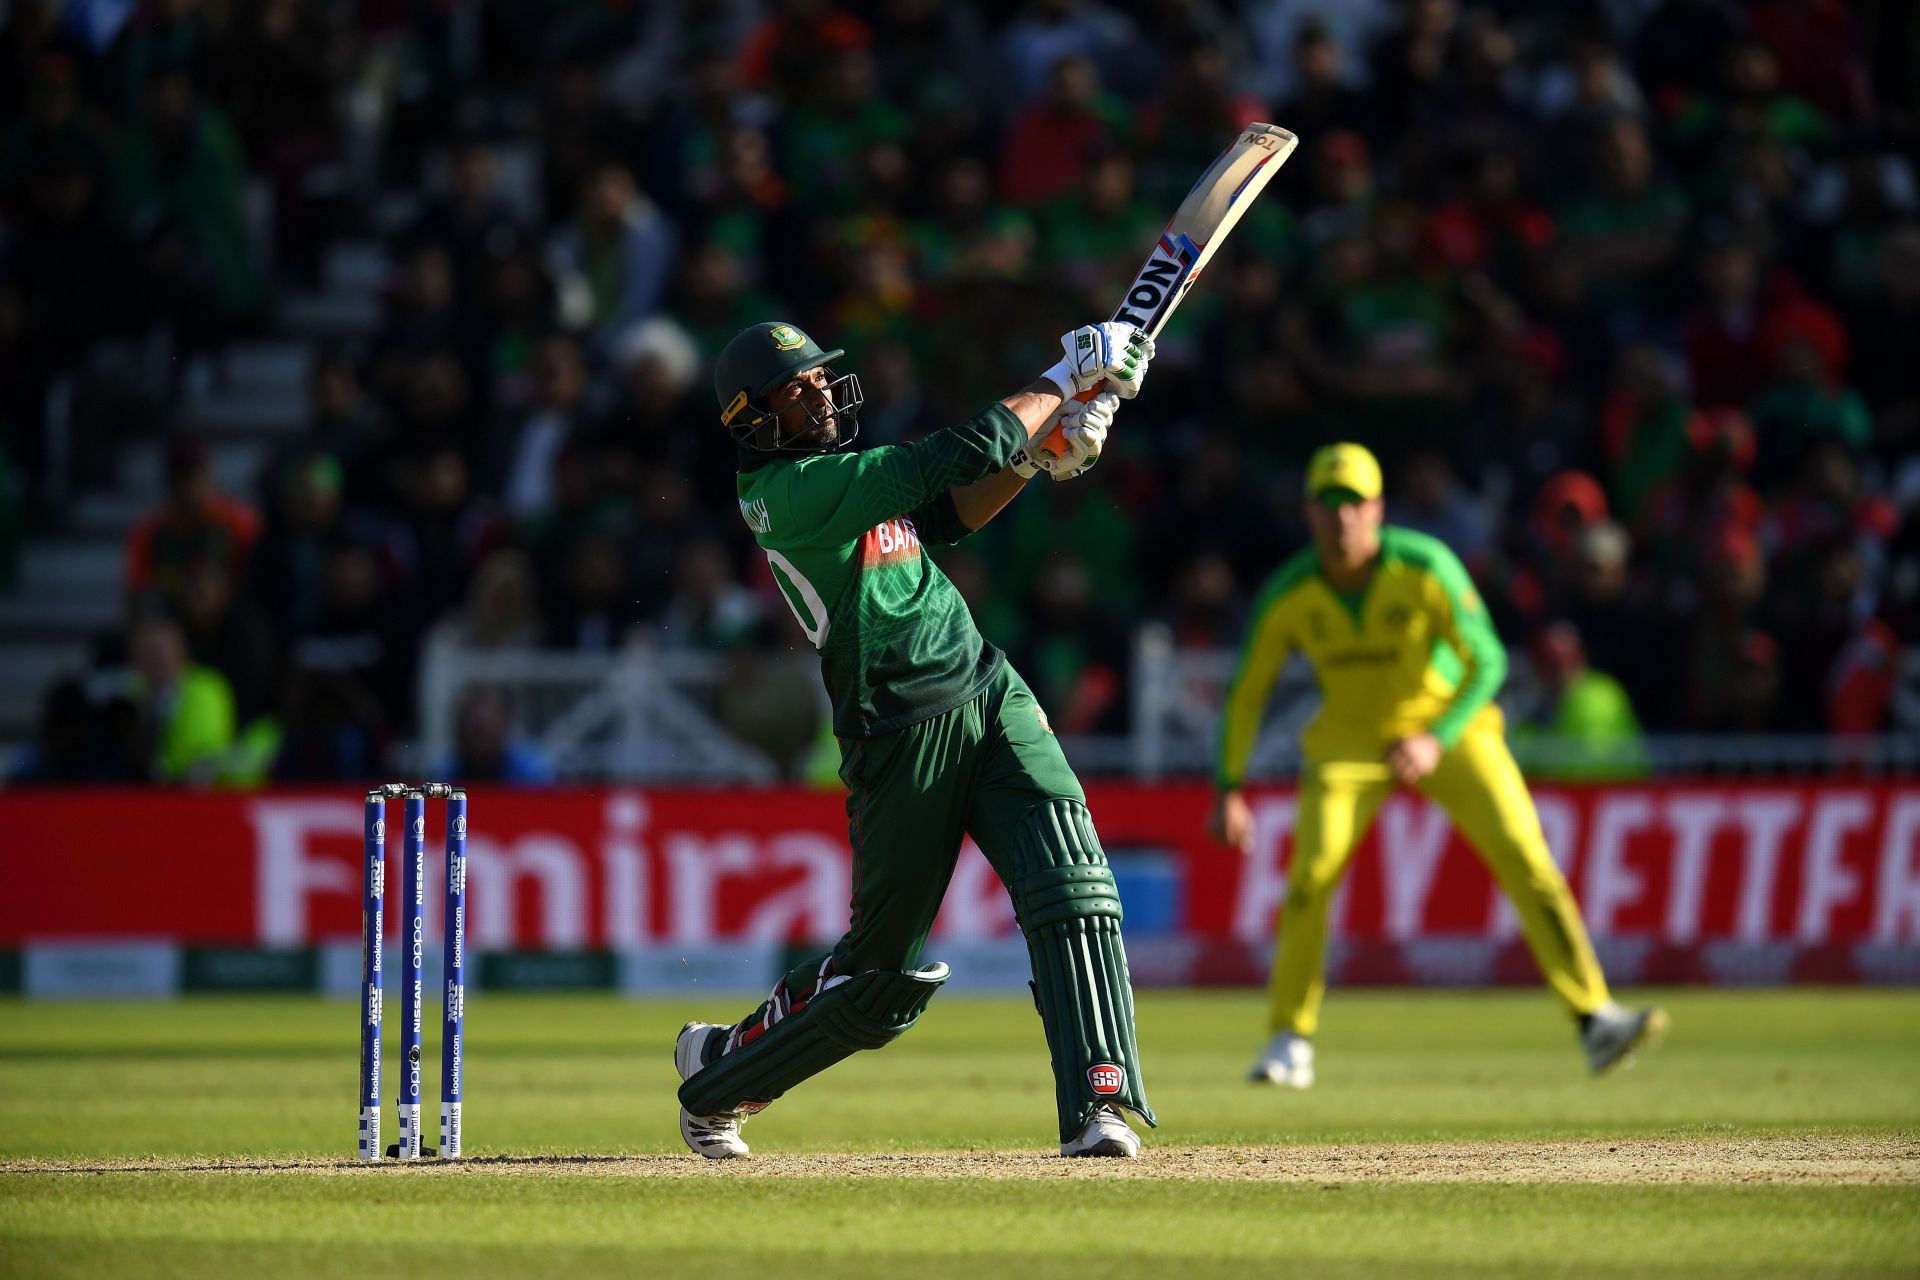 Can Mahmudullah and Co. end their ICC T20 World Cup 2021 campaign on a winning note?